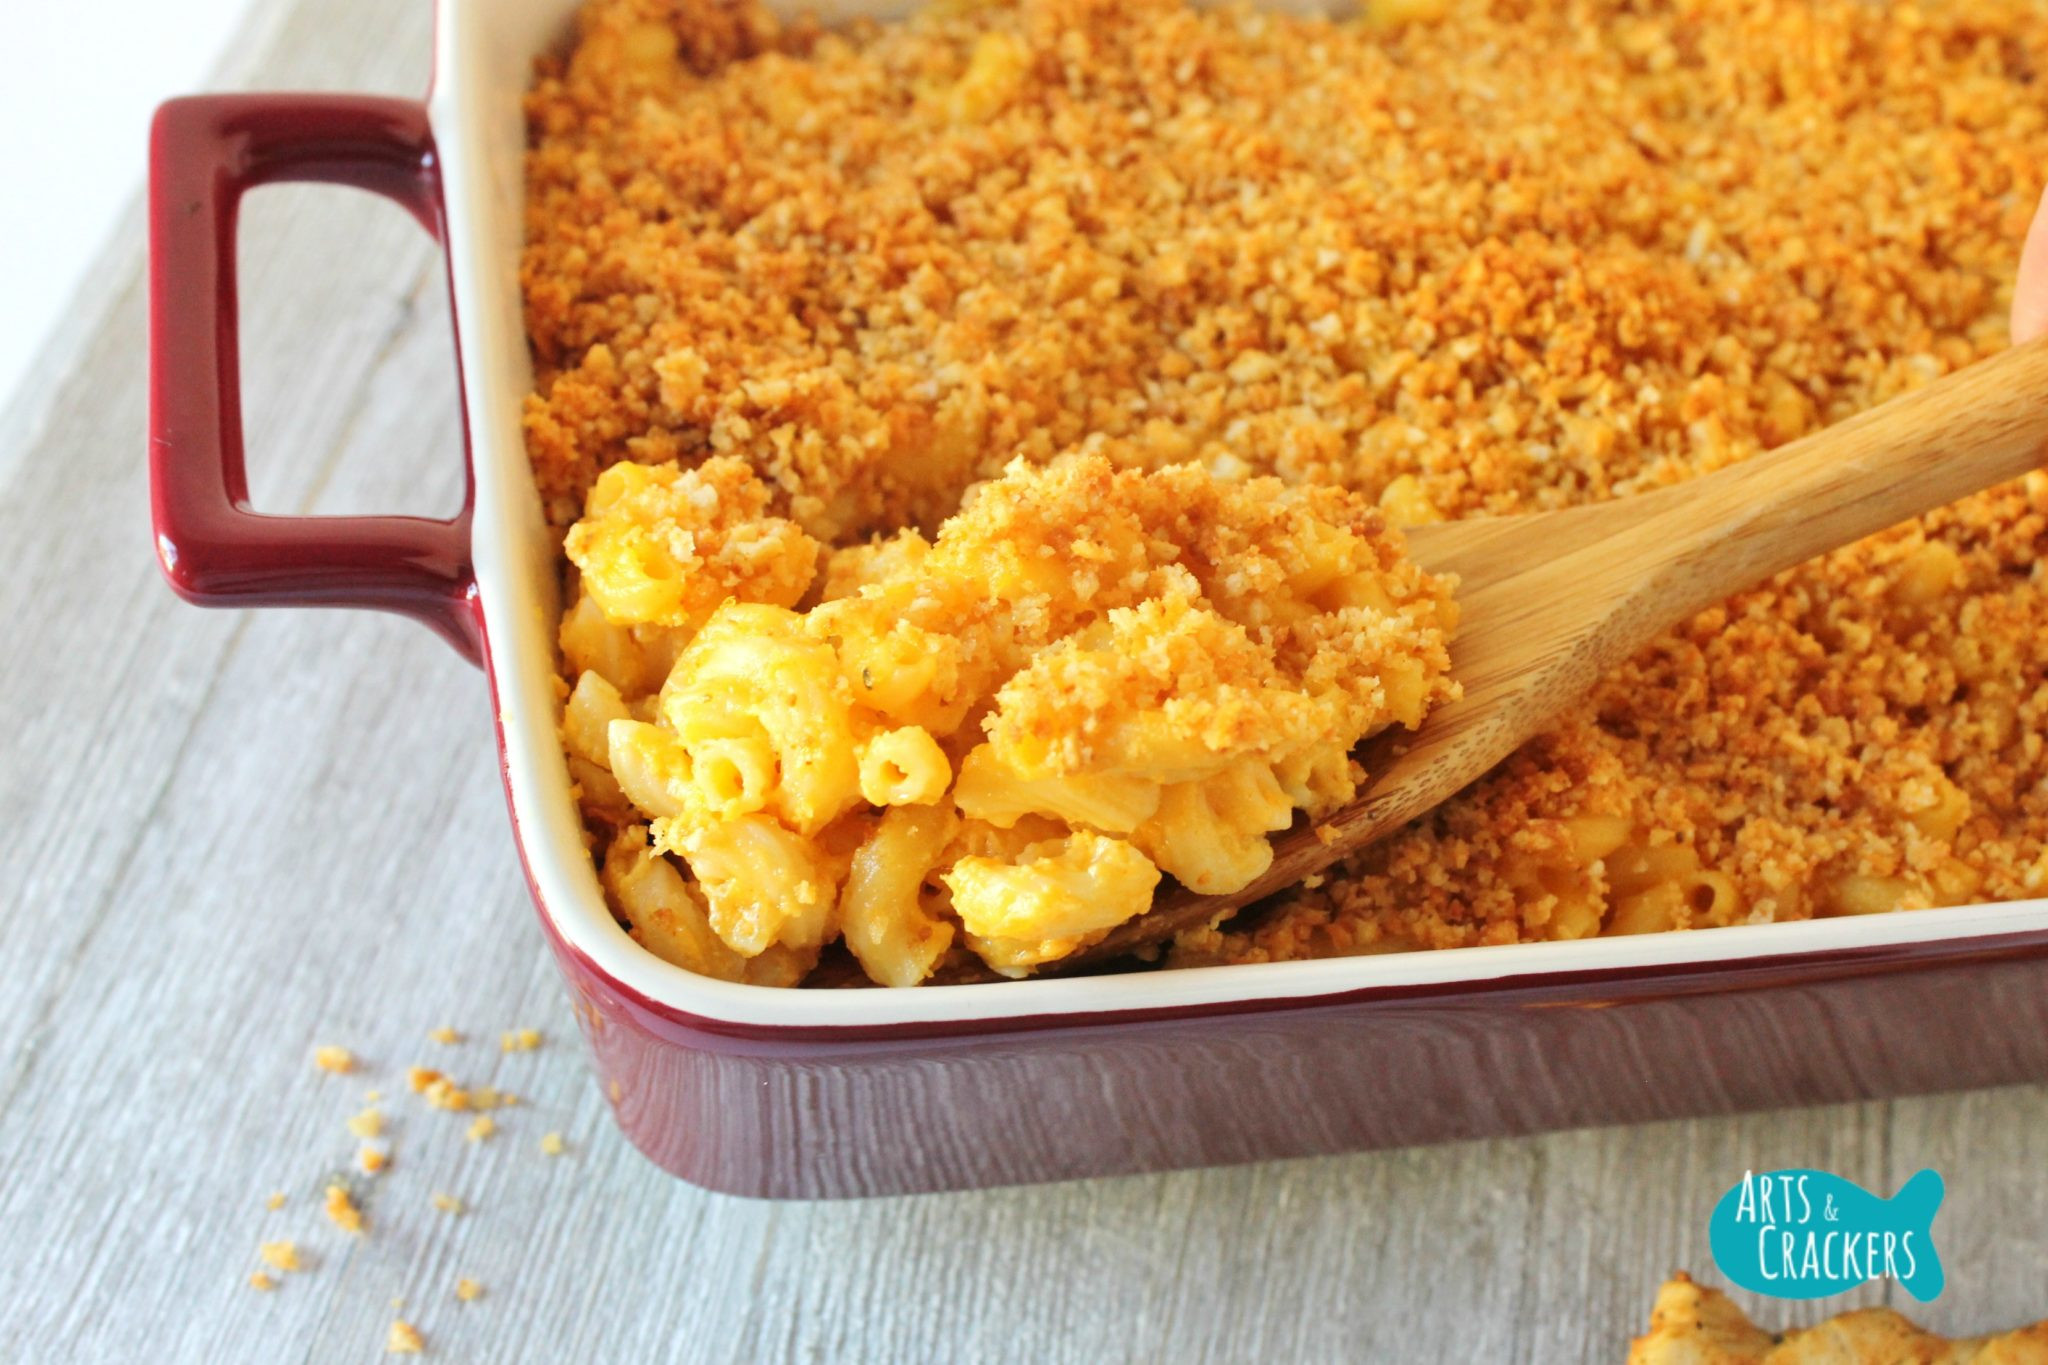 Recipe For Baked Macaroni And Cheese With Bread Crumbs
 Everyday Macaroni And Cheese With Crispy Crumb Topping